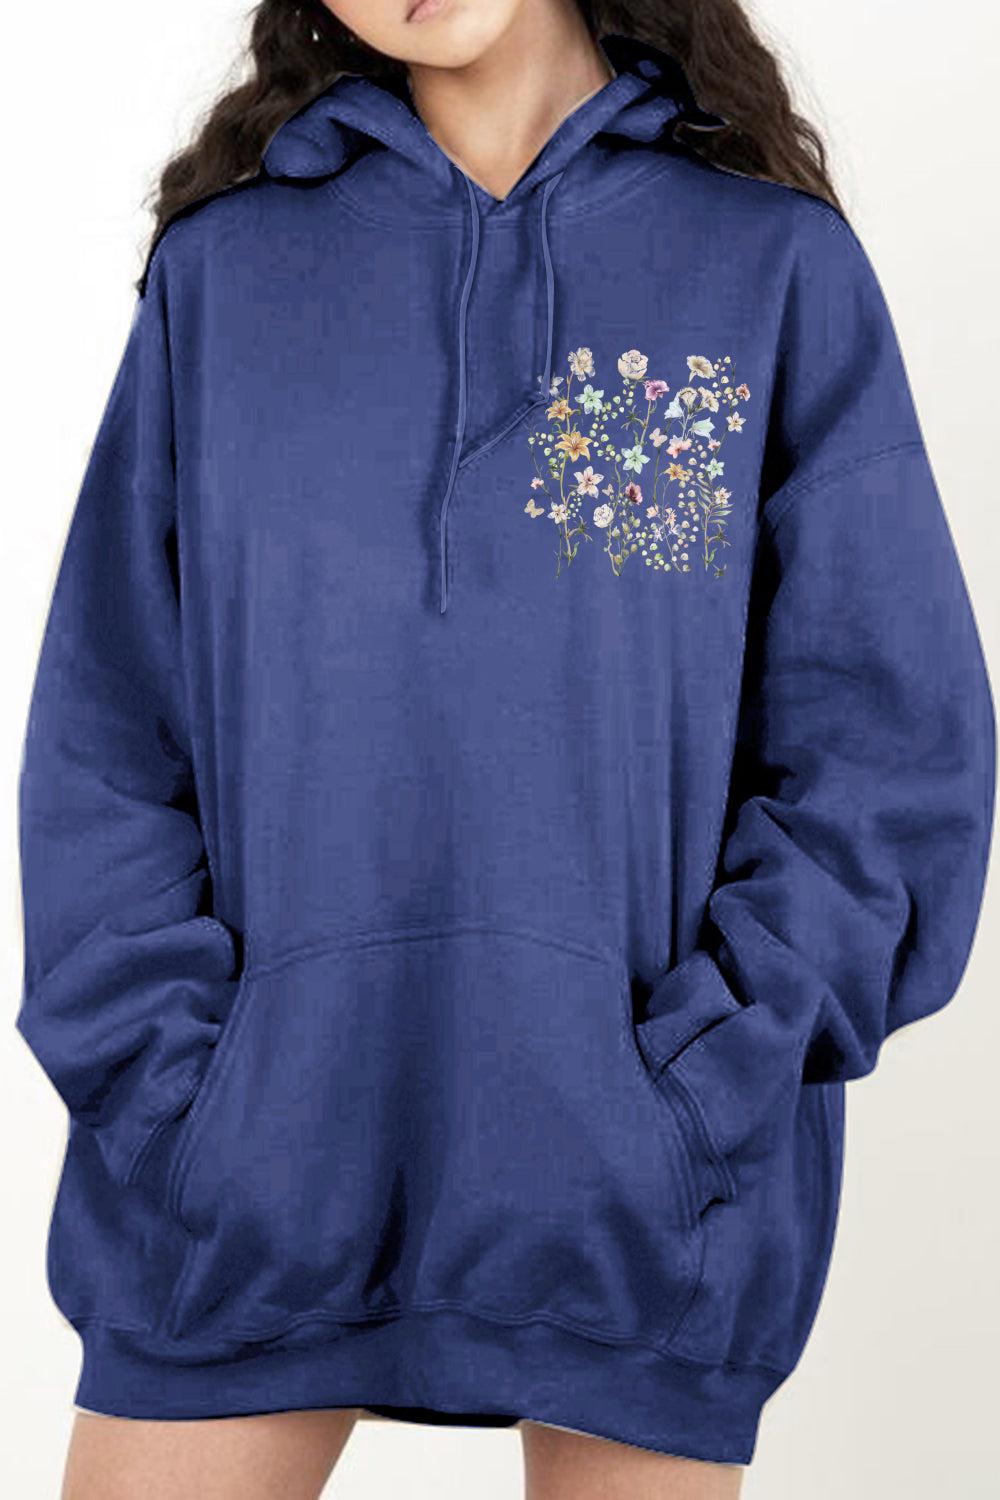 Simply Love Simply Love Full Size Flower Graphic Dropped Shoulder Hoodie BLUE ZONE PLANET